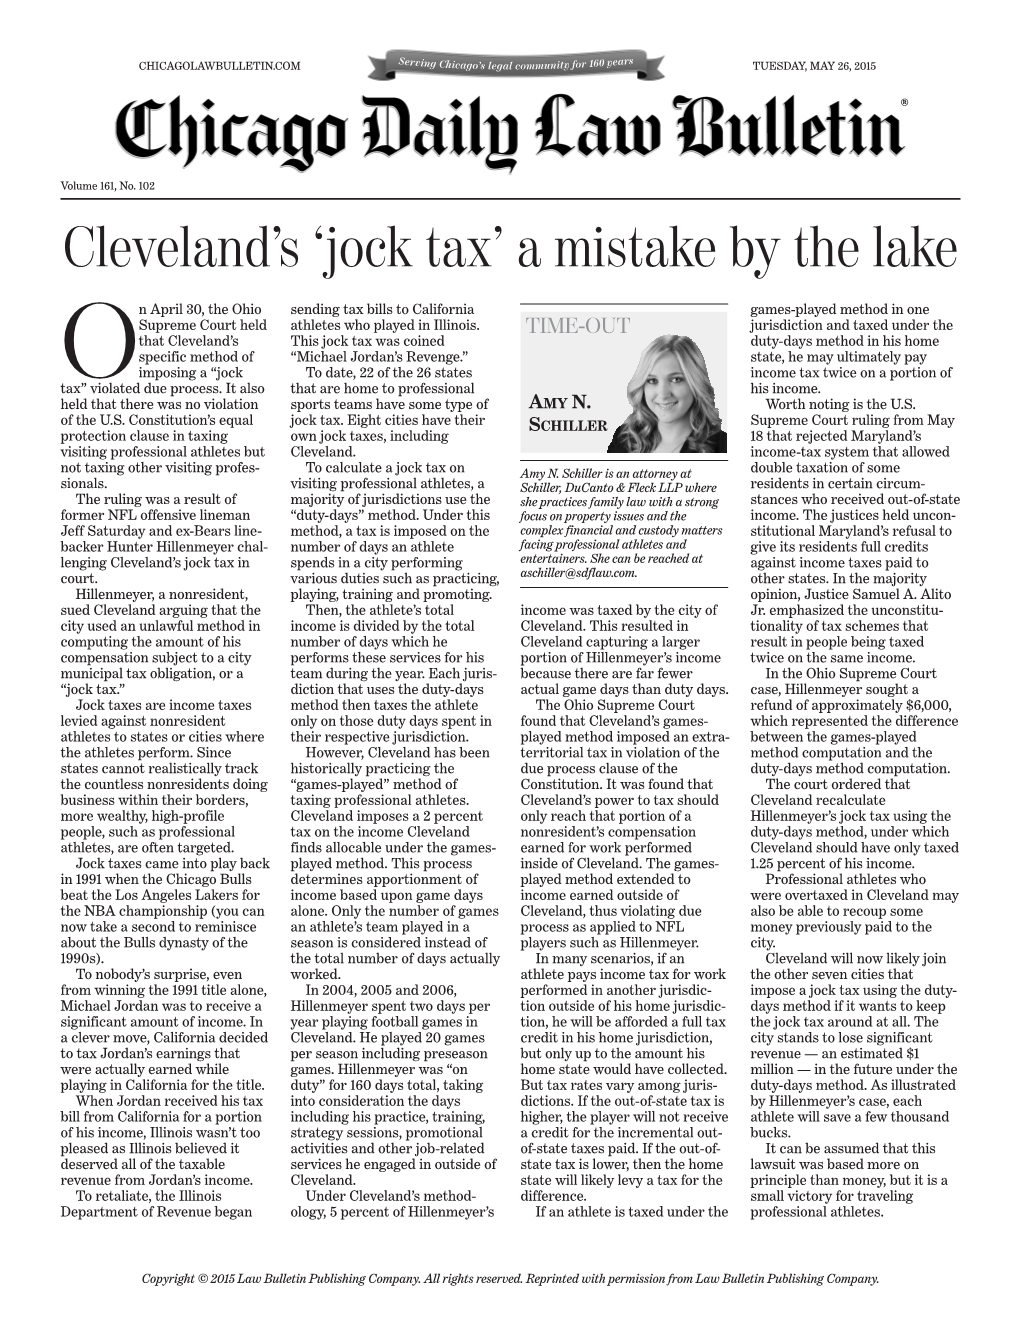 Jock Tax’ a Mistake by the Lake